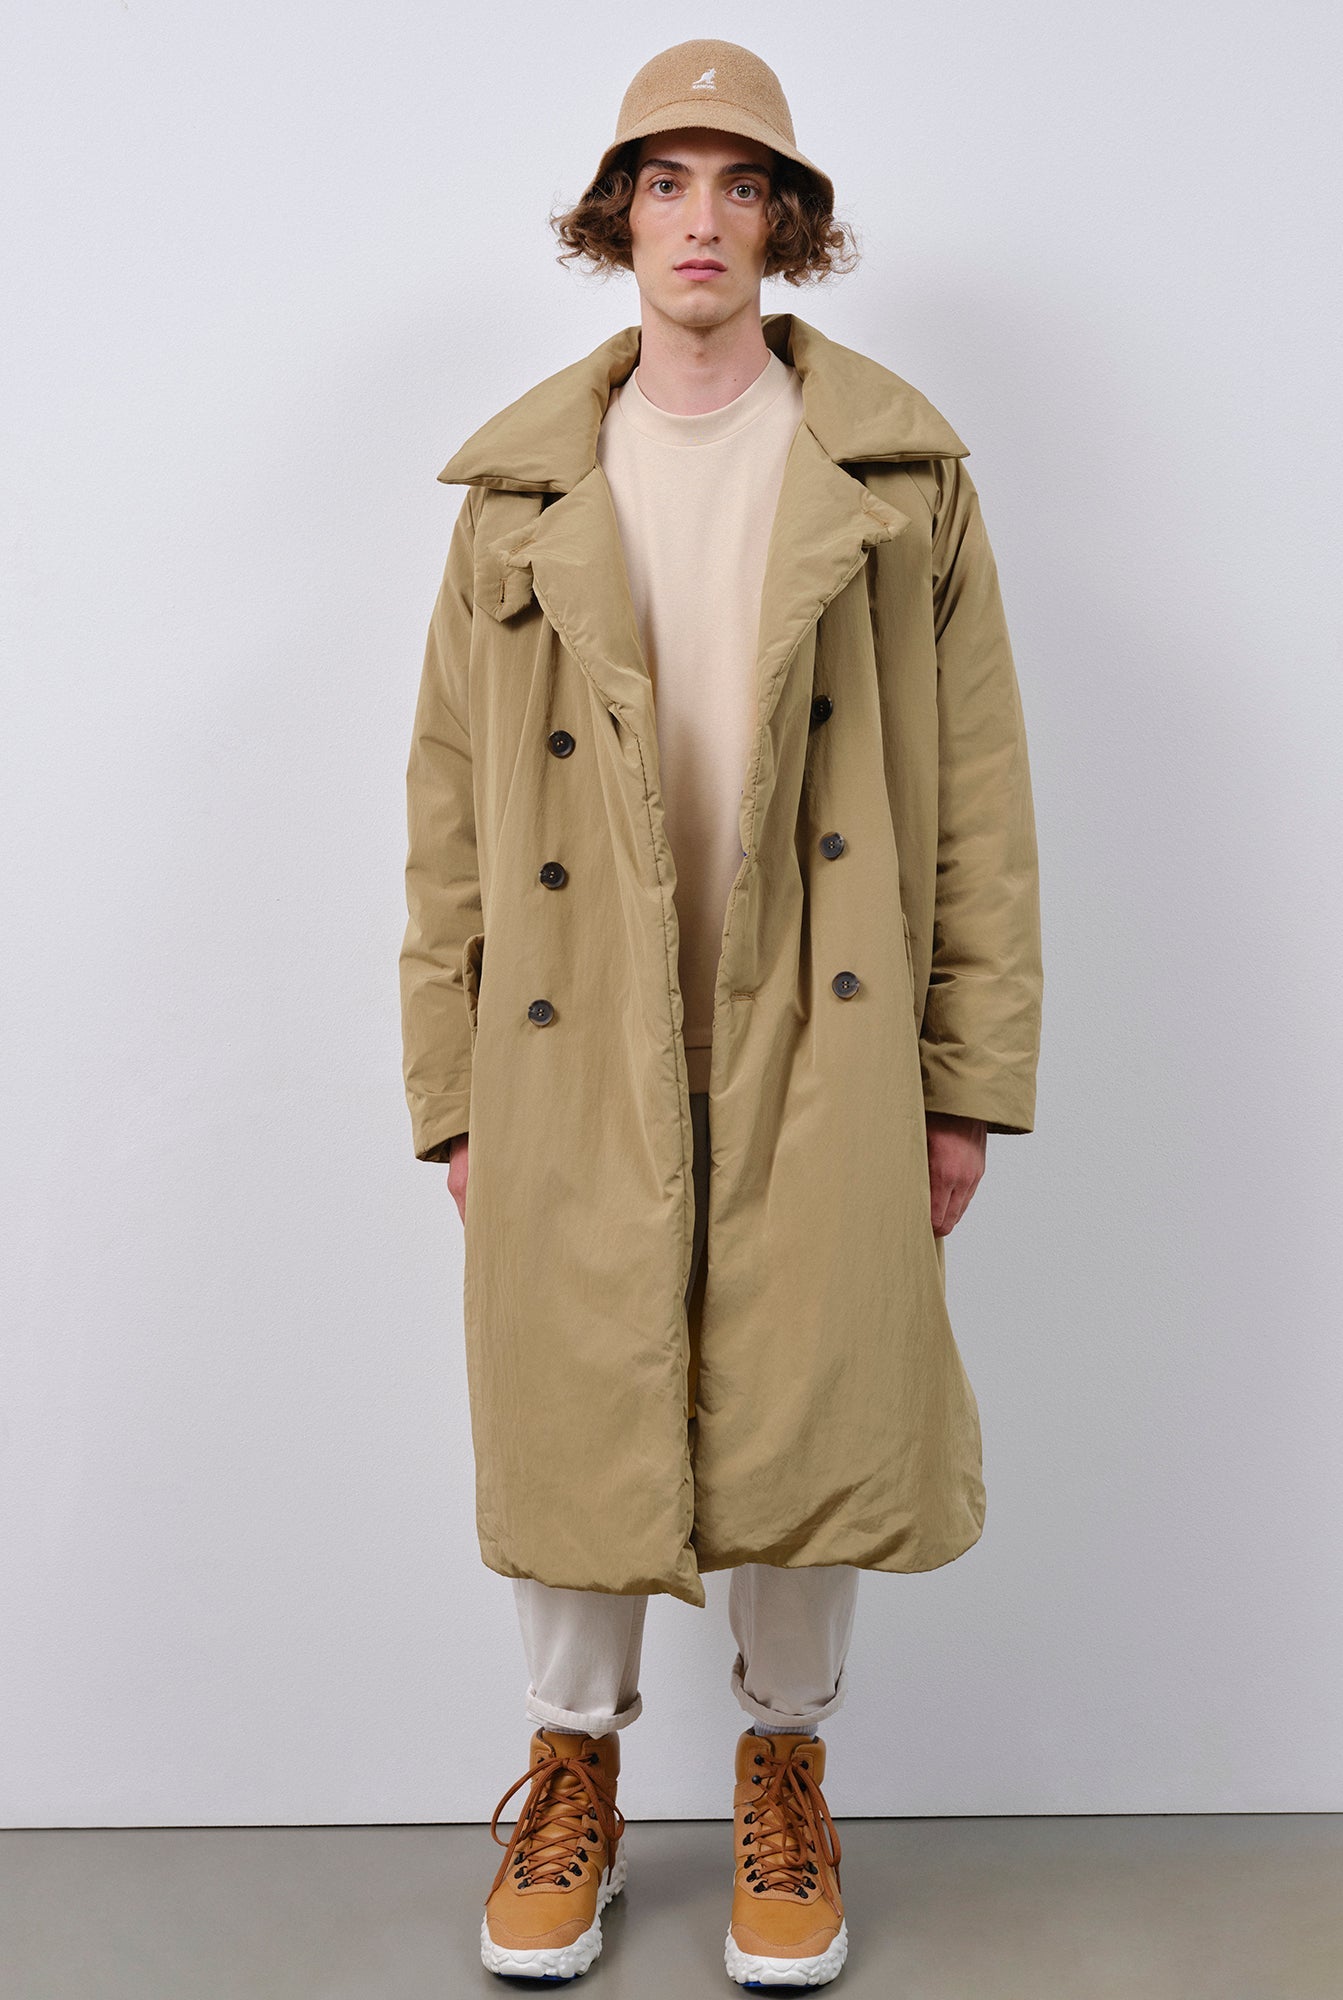 Embassy-of-Bricks-and-Logs-OUTLET-SALE-KINGSGATE-PUFFER-COAT-Jacken-Mantel-ARCHIVE-COLLECTION_d351ae6b-348d-40b0-a768-9d4e21ff3ccf.jpg